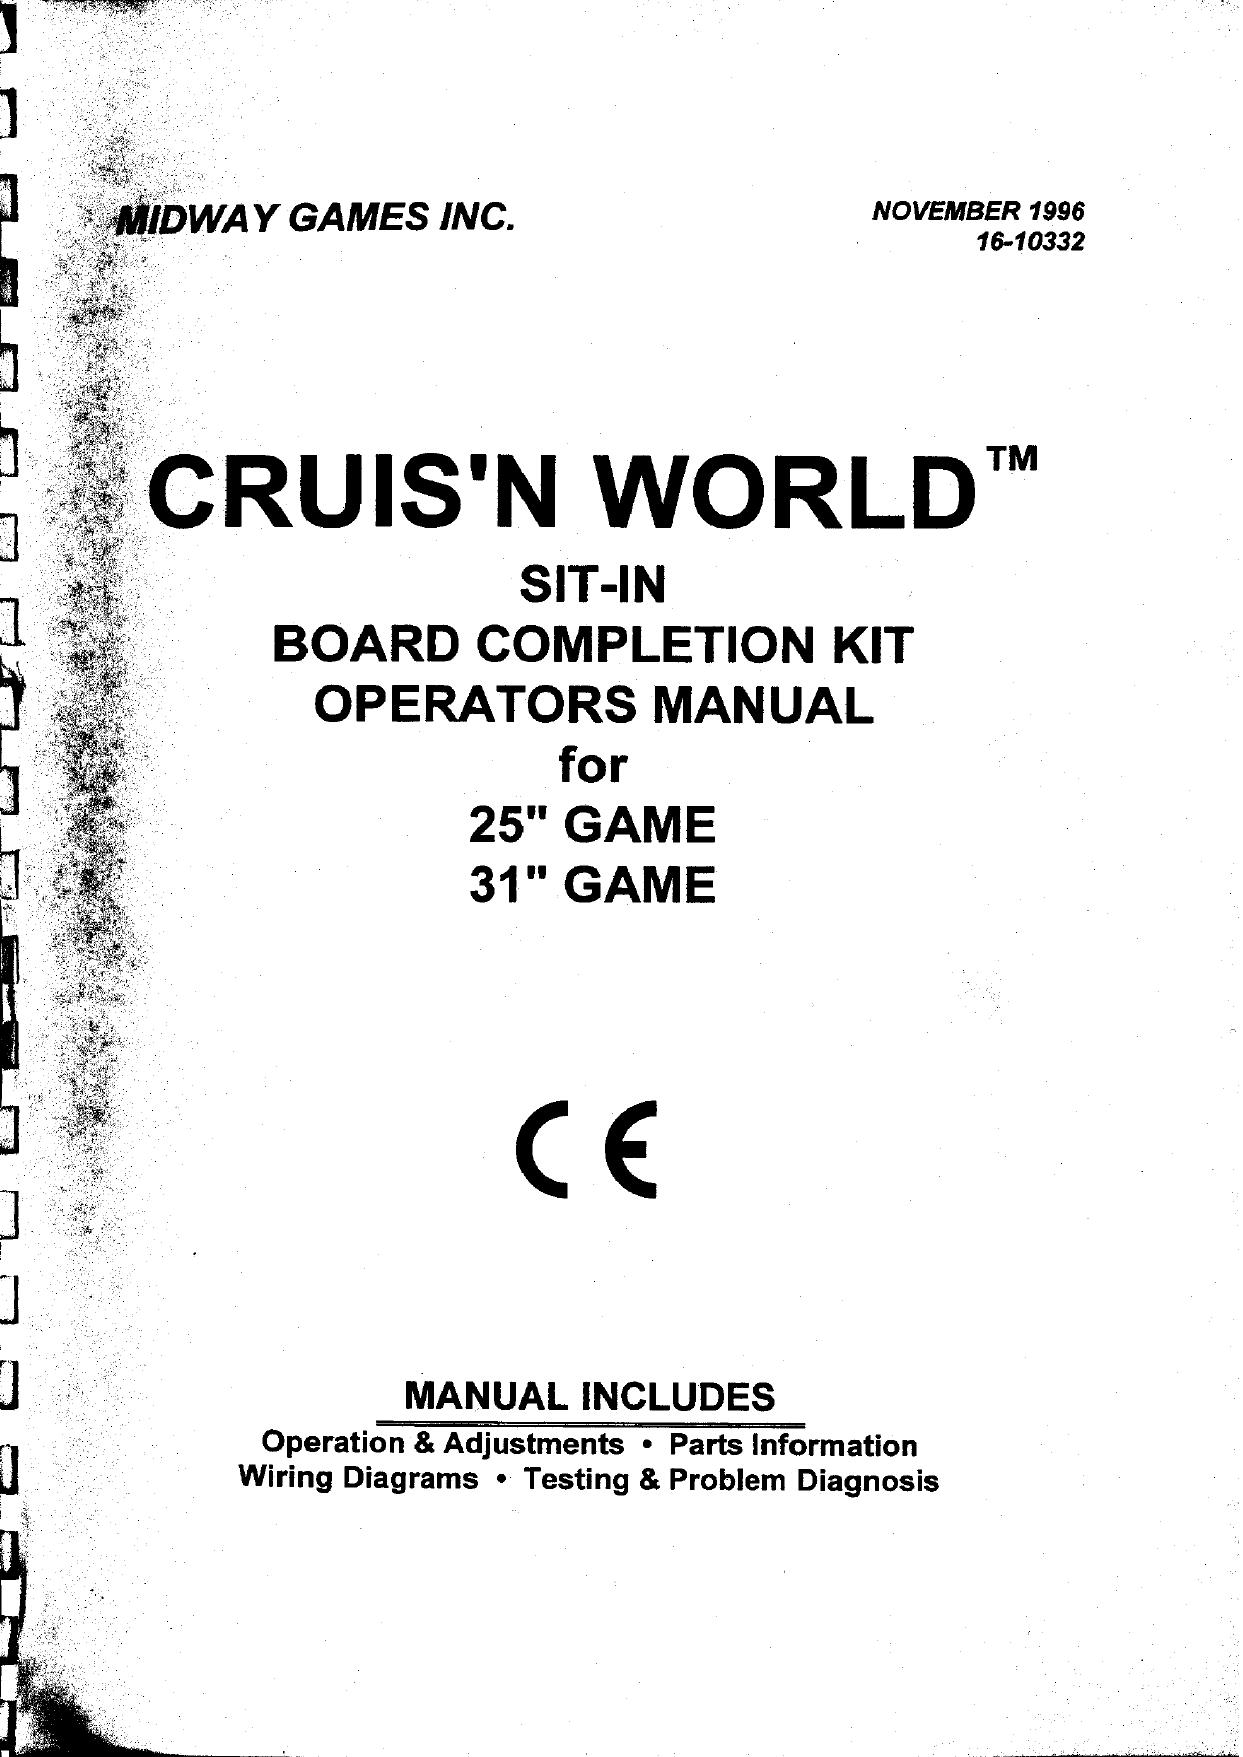 Cruis'n World Sit-In Board Completion Kit